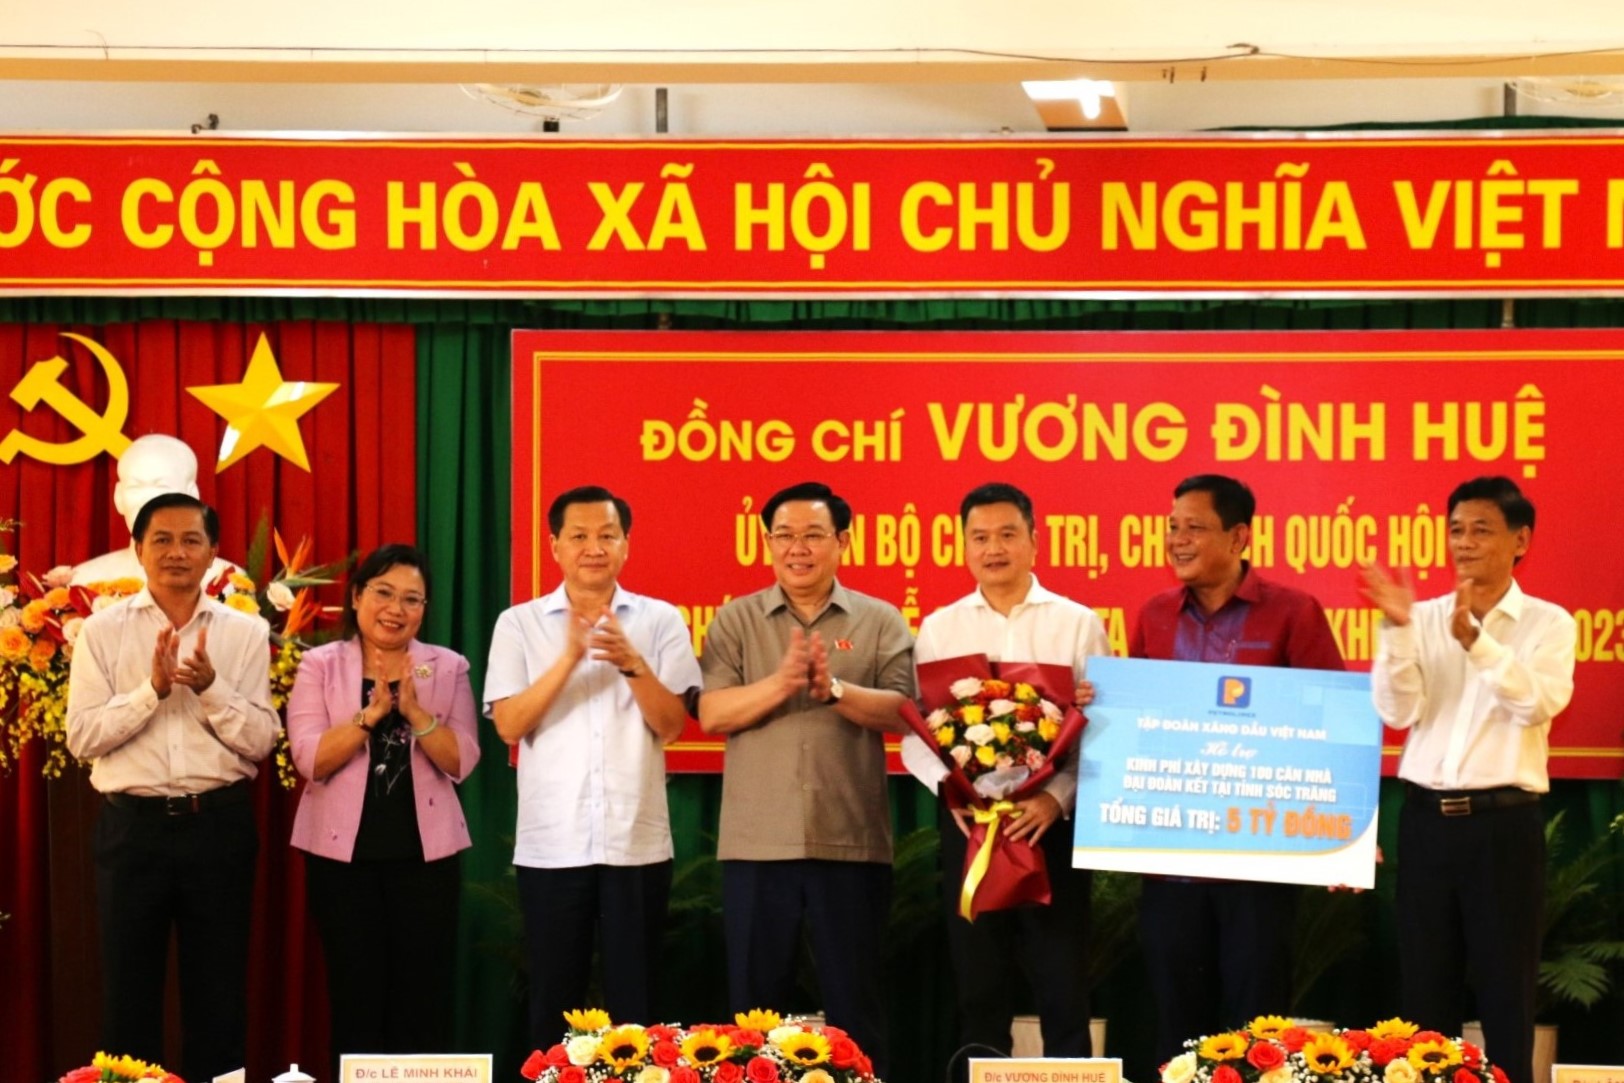 Petrolimex donates $612,000 to support housing projects for needy people in Can Tho, Hau Giang and Soc Trang